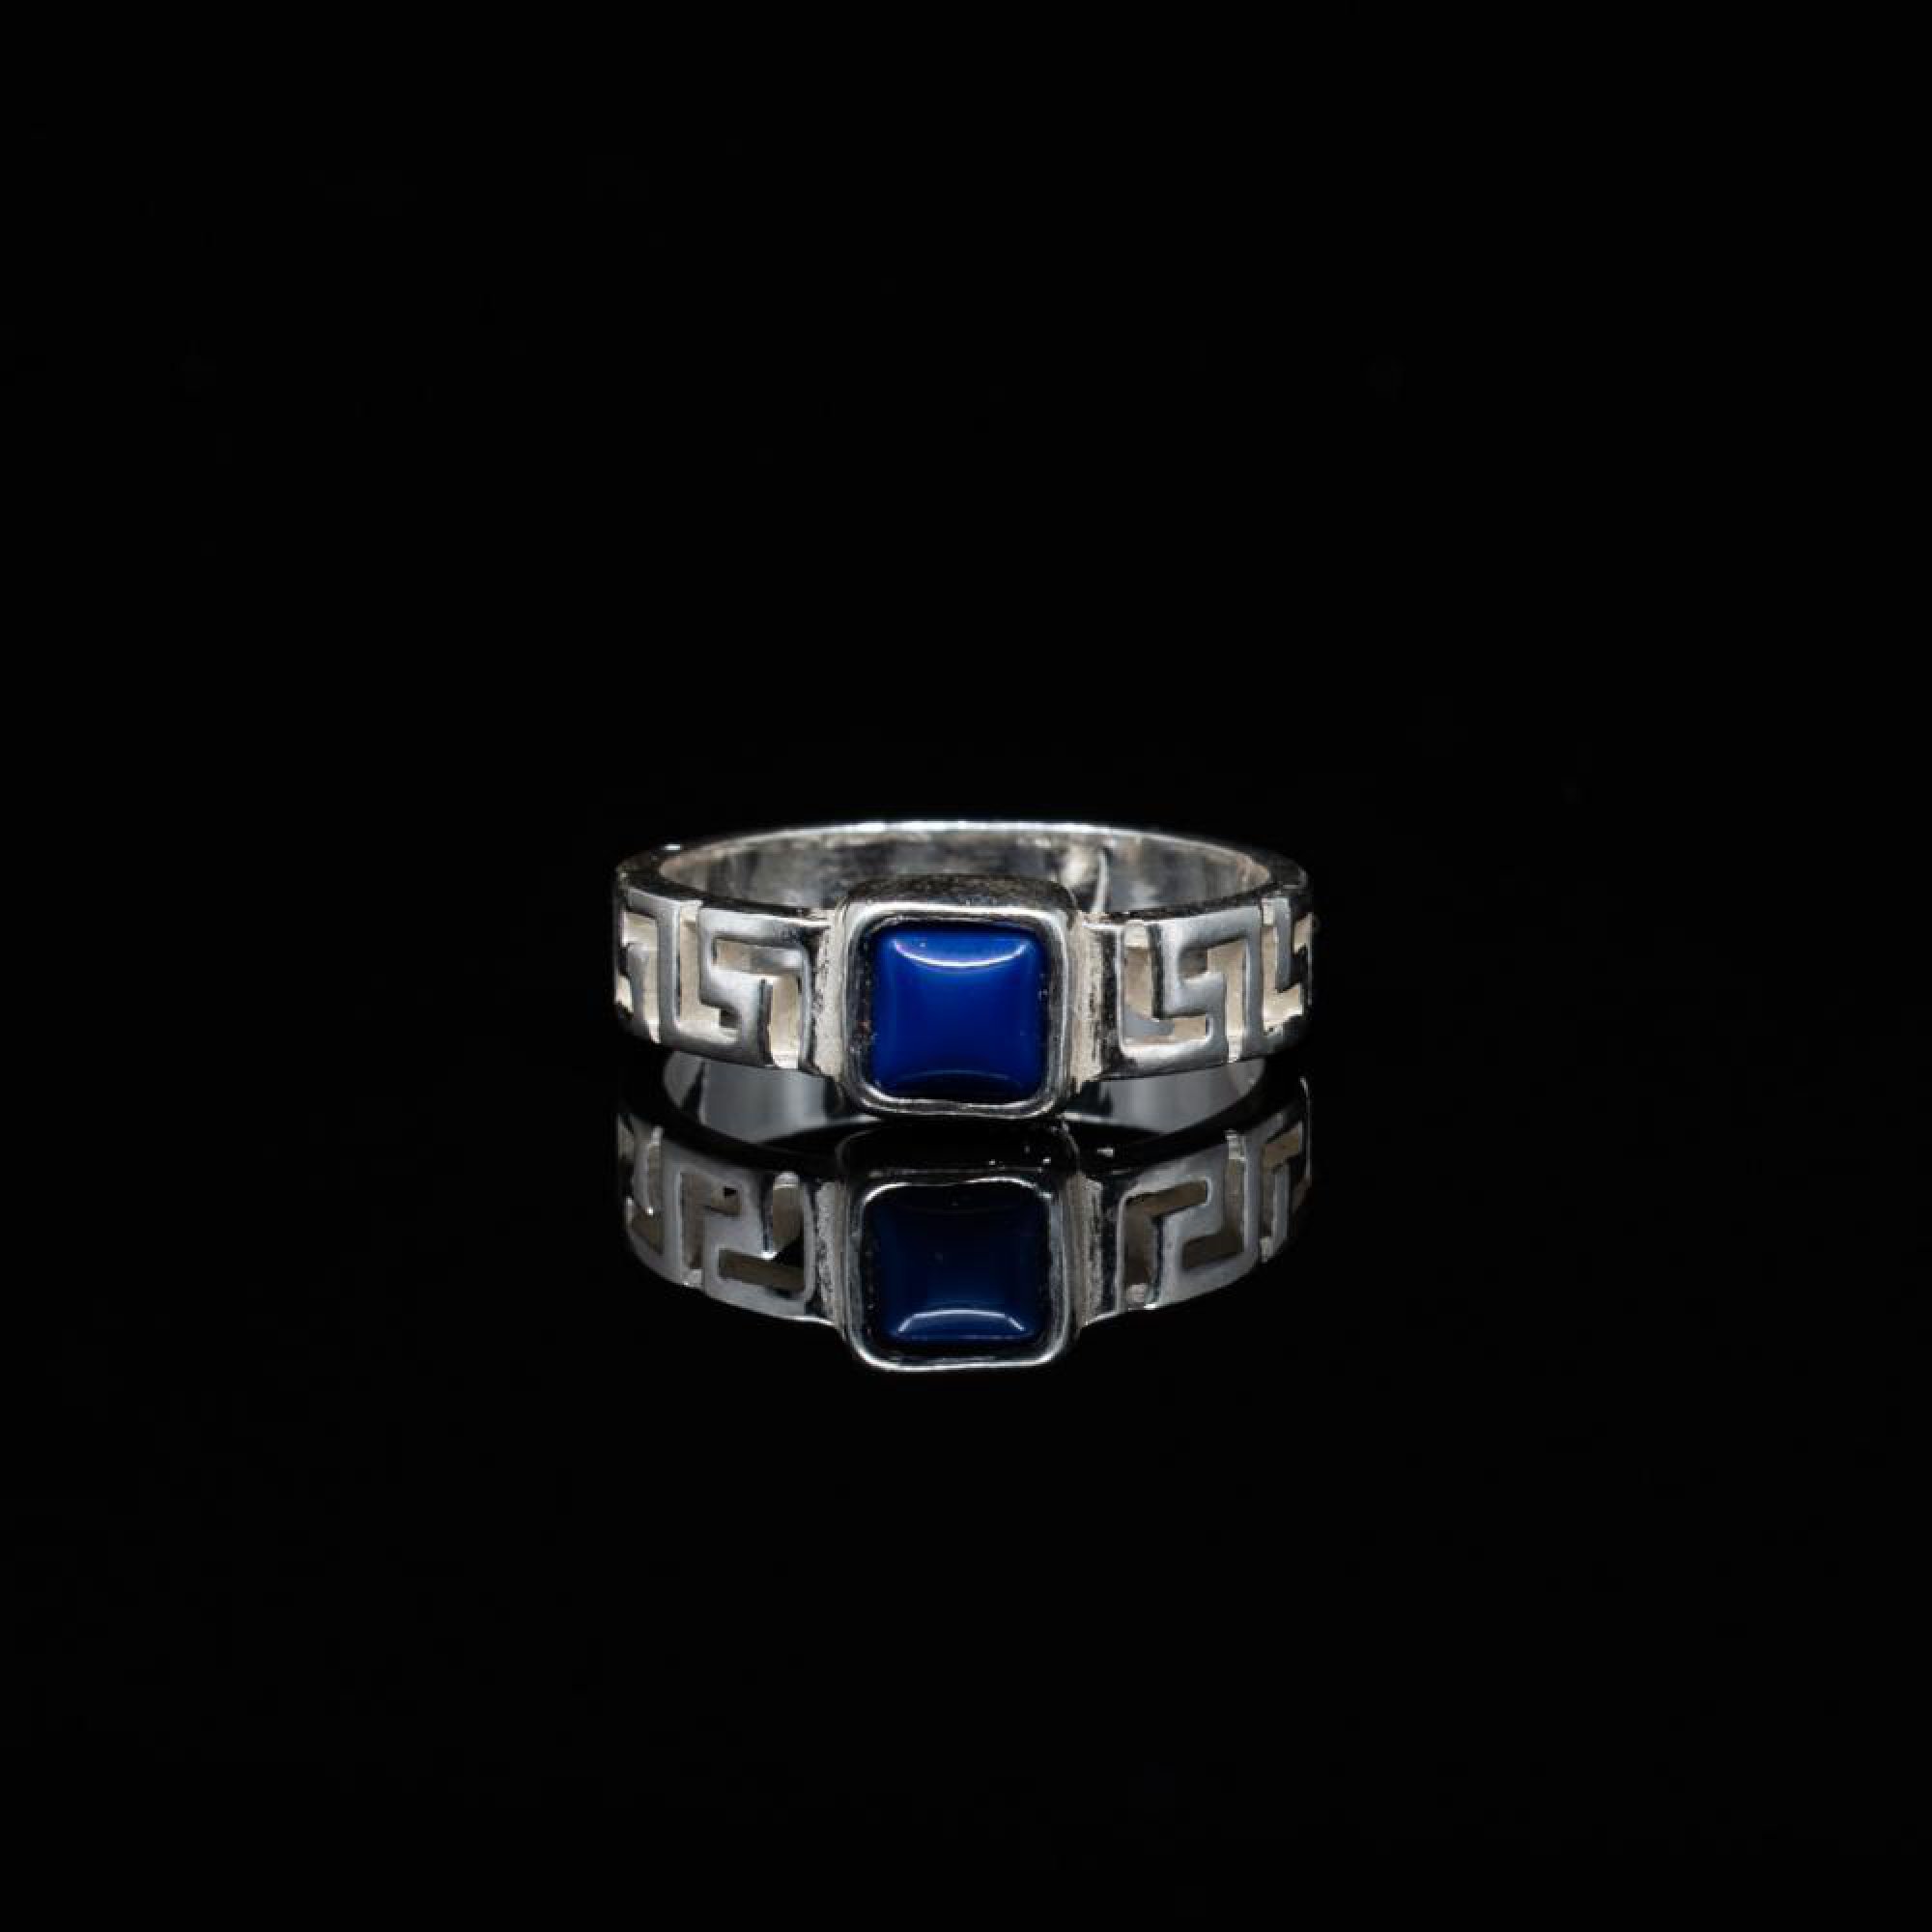 Meander ring with lapis lazuli stone